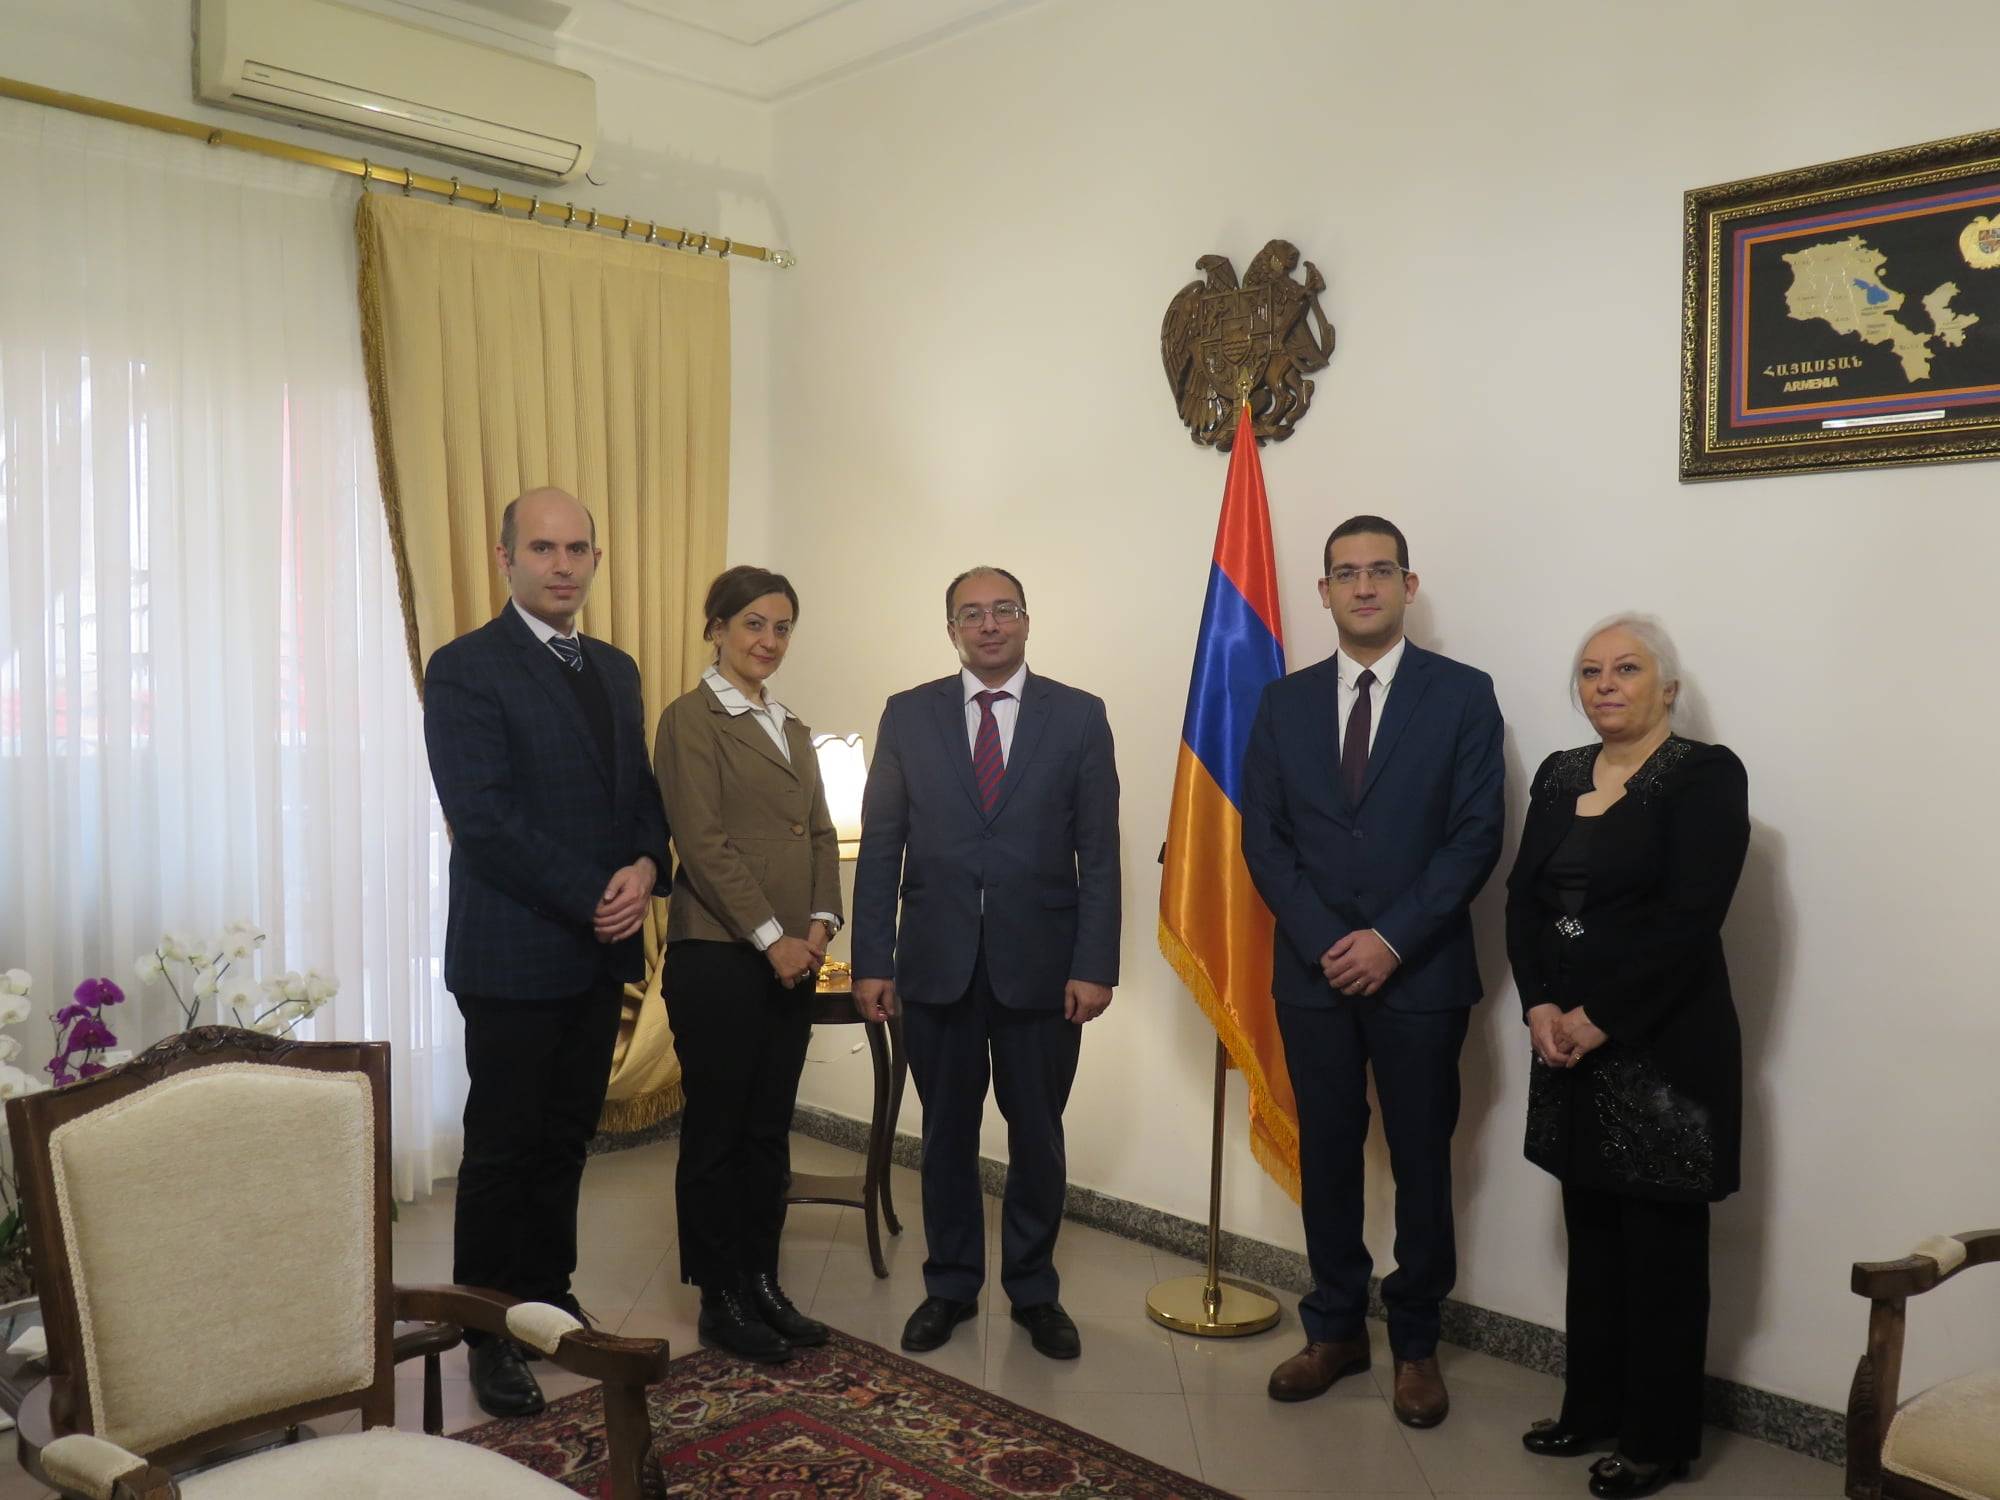 On January 27, Arsen Avagyan, Ambassador of the Republic of Armenia to the Islamic Republic of Iran, received Njdeh Mootafyan, Chairman of “Armenian General Benevolent Union” of Tehran, along with the members of the managing board of the Organization